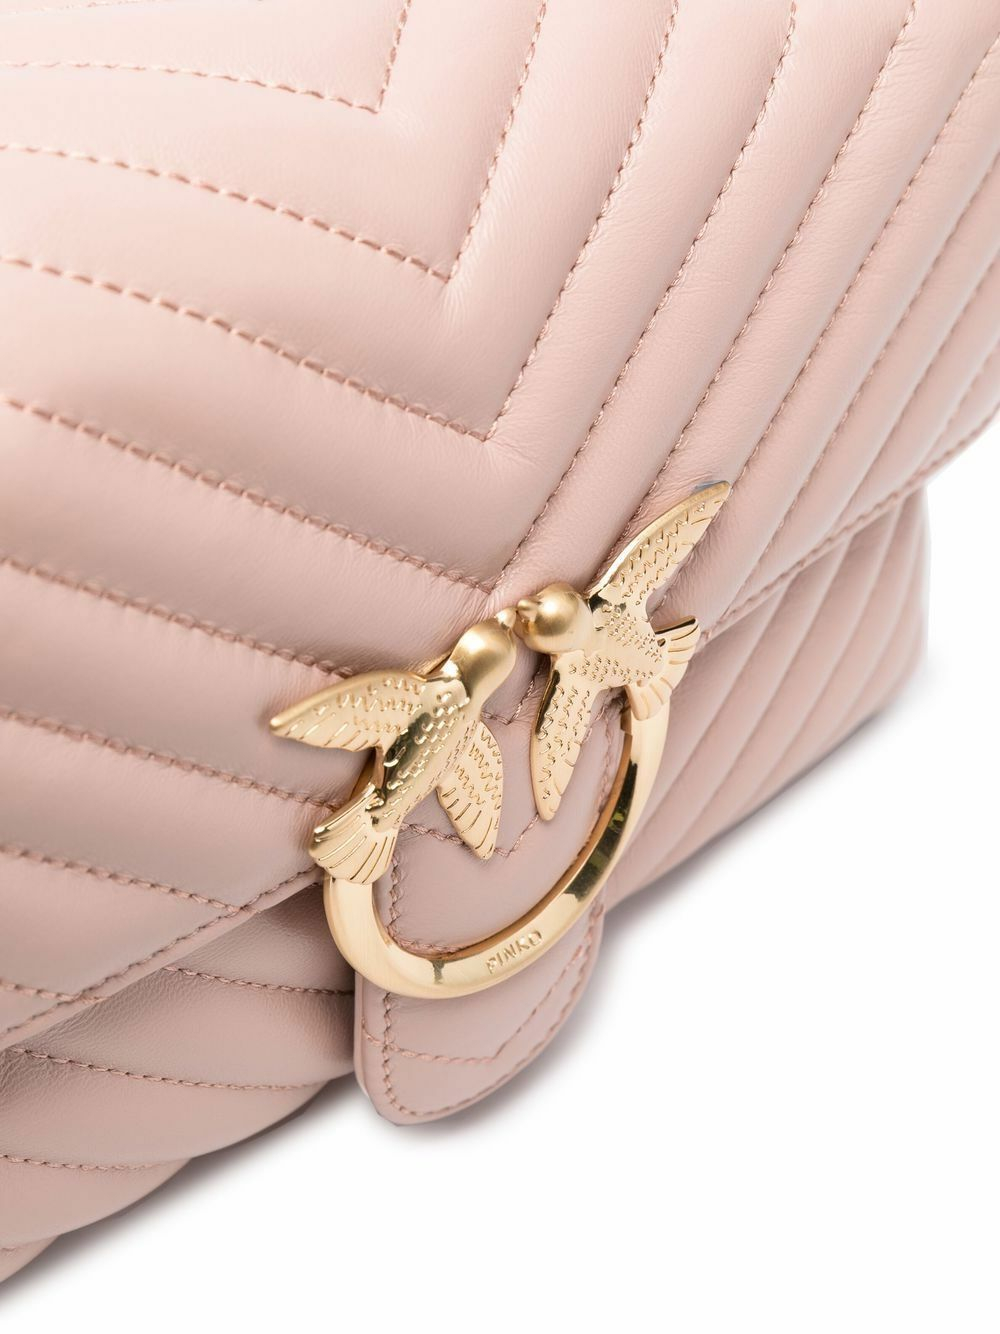 LADY LOVE BAG PUFF - pink gold